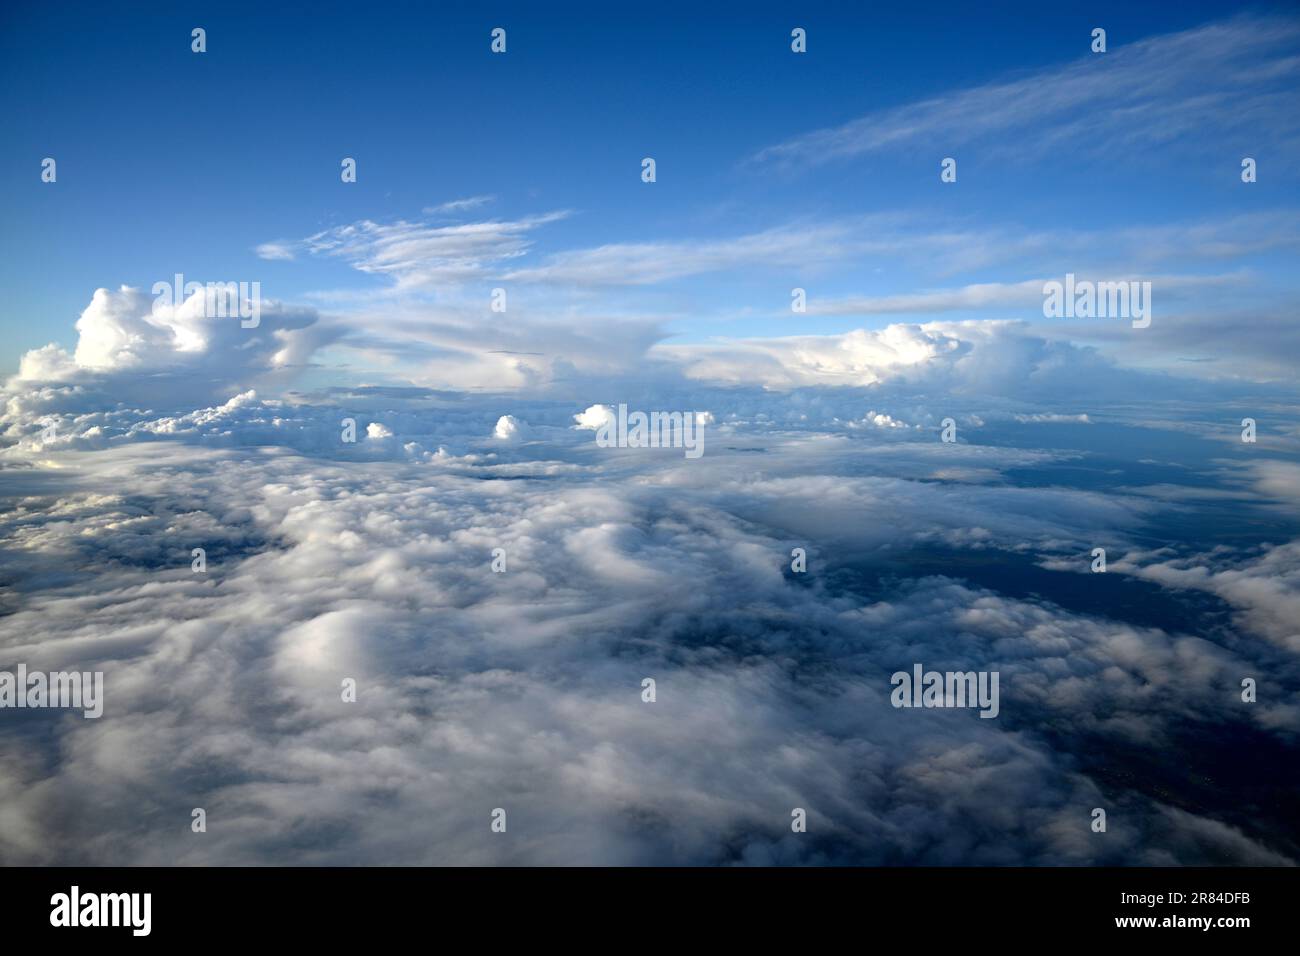 Turbulence in the Skies and High Clouds over Bali, Indonesia Stock Photo